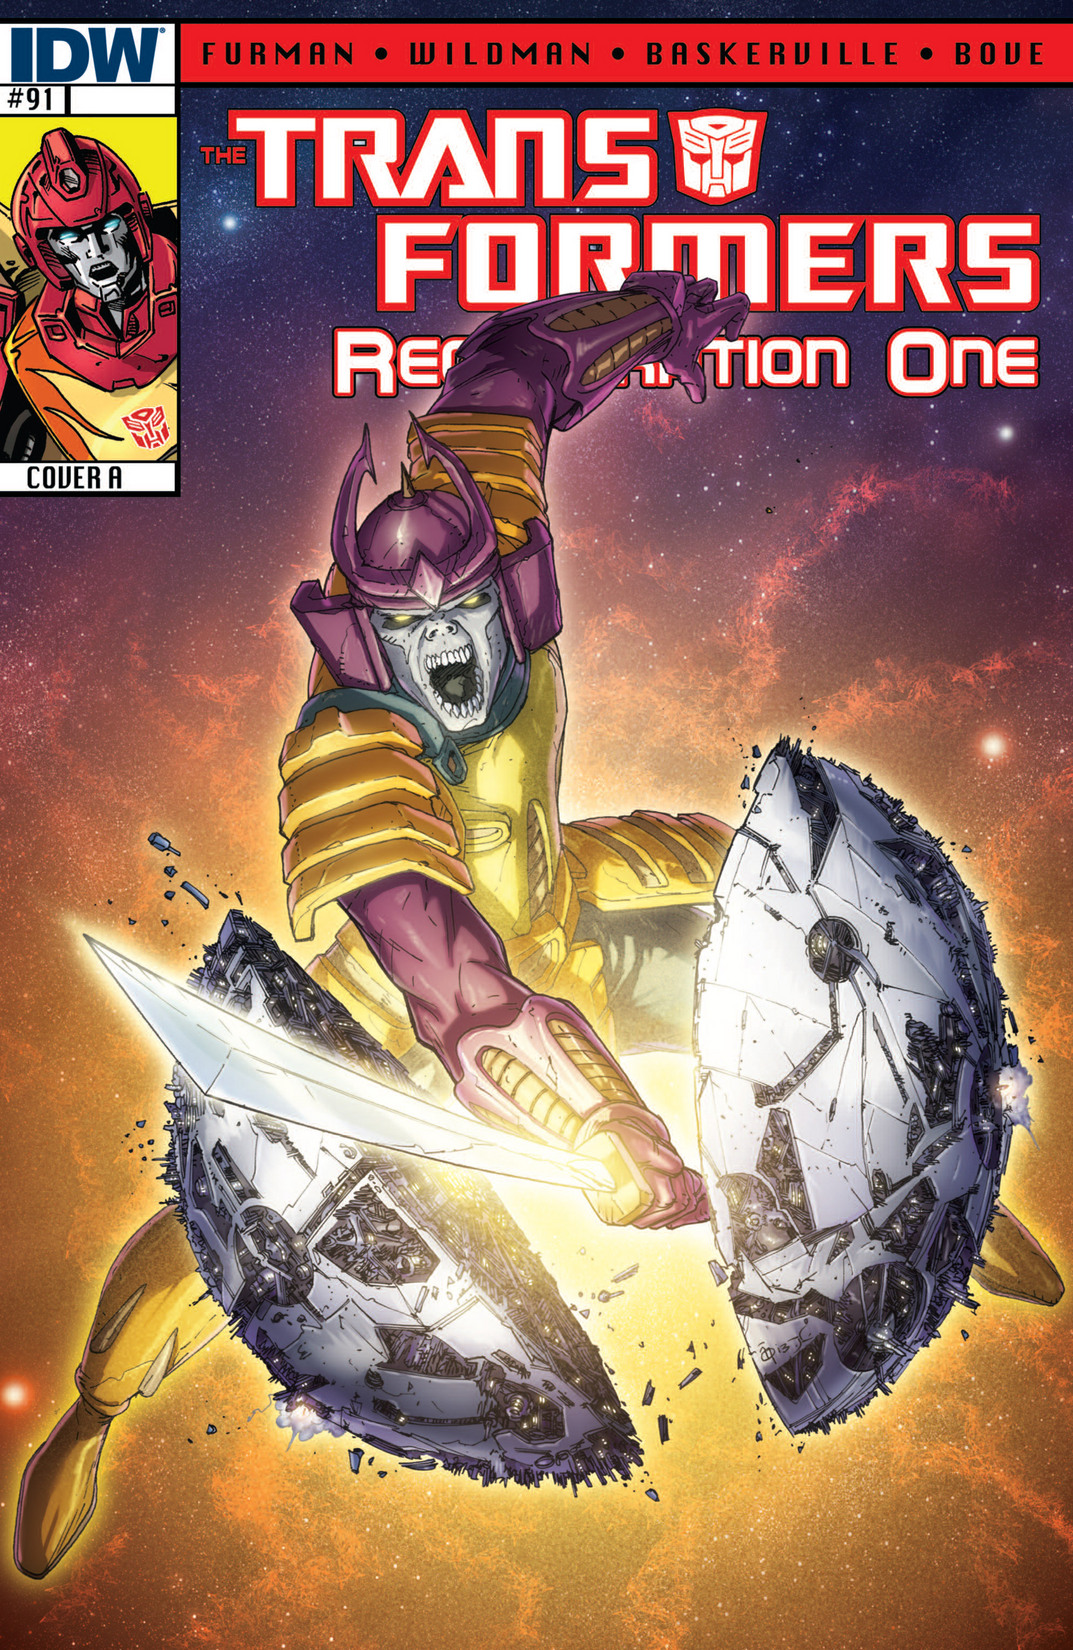 Read online The Transformers: Regeneration One comic -  Issue #91 - 1